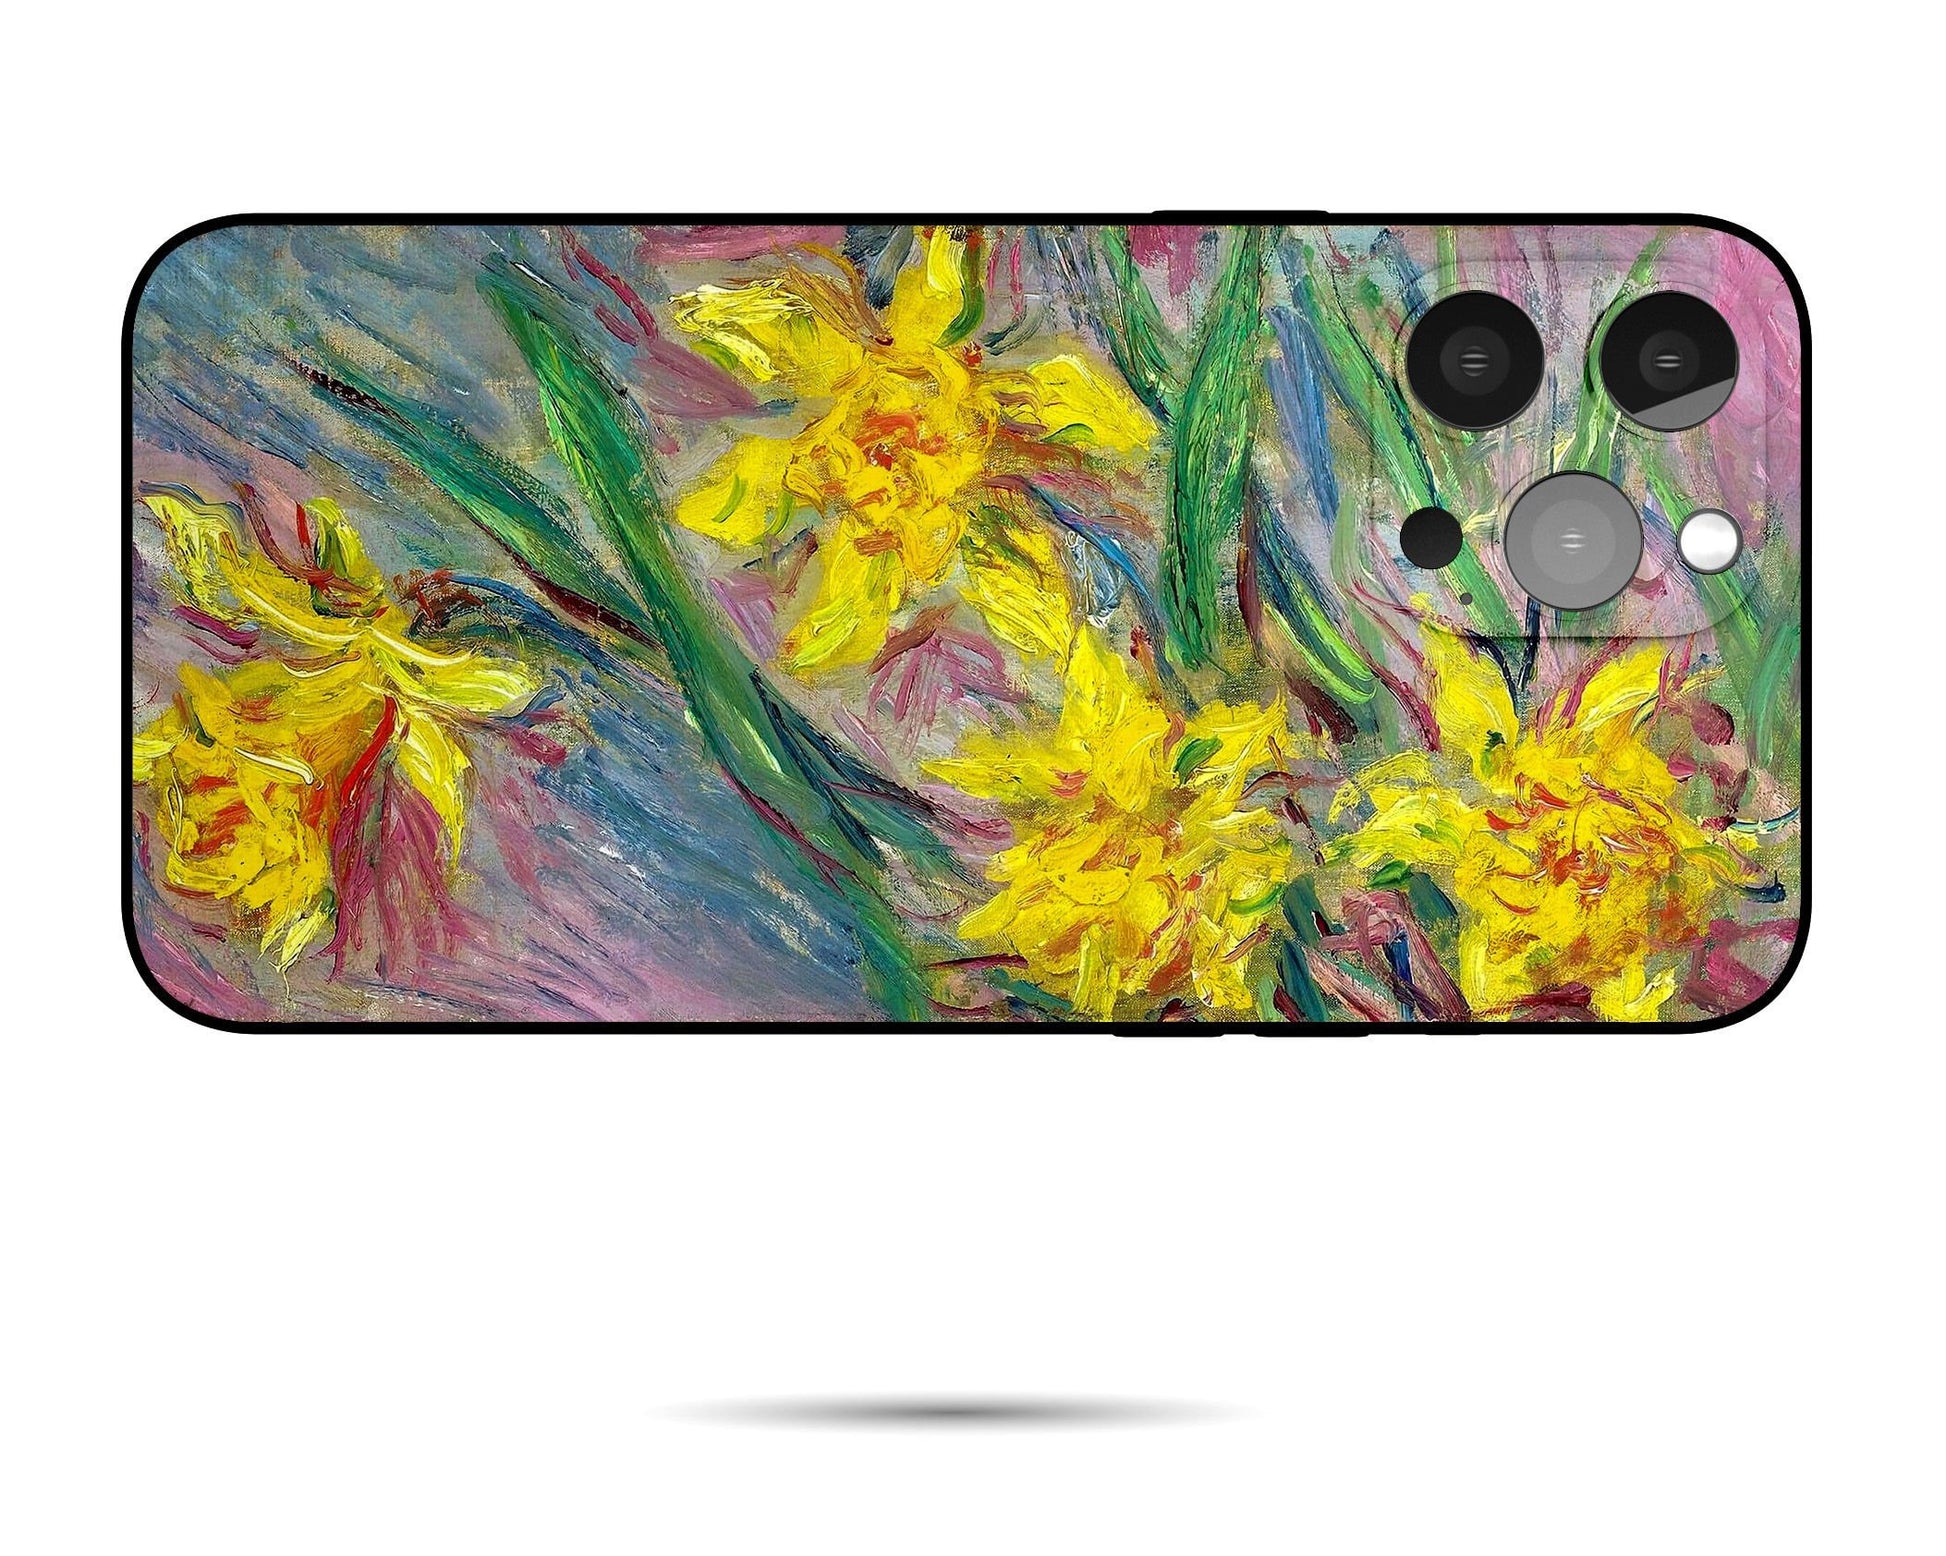 Claude Monet Famous Painting Iphone 14 Pro Max Cases, Iphone 13 Pro Case, Iphone 7 Plus Case, Iphone 8 Plus Case Art, Gift For Her, Silicone